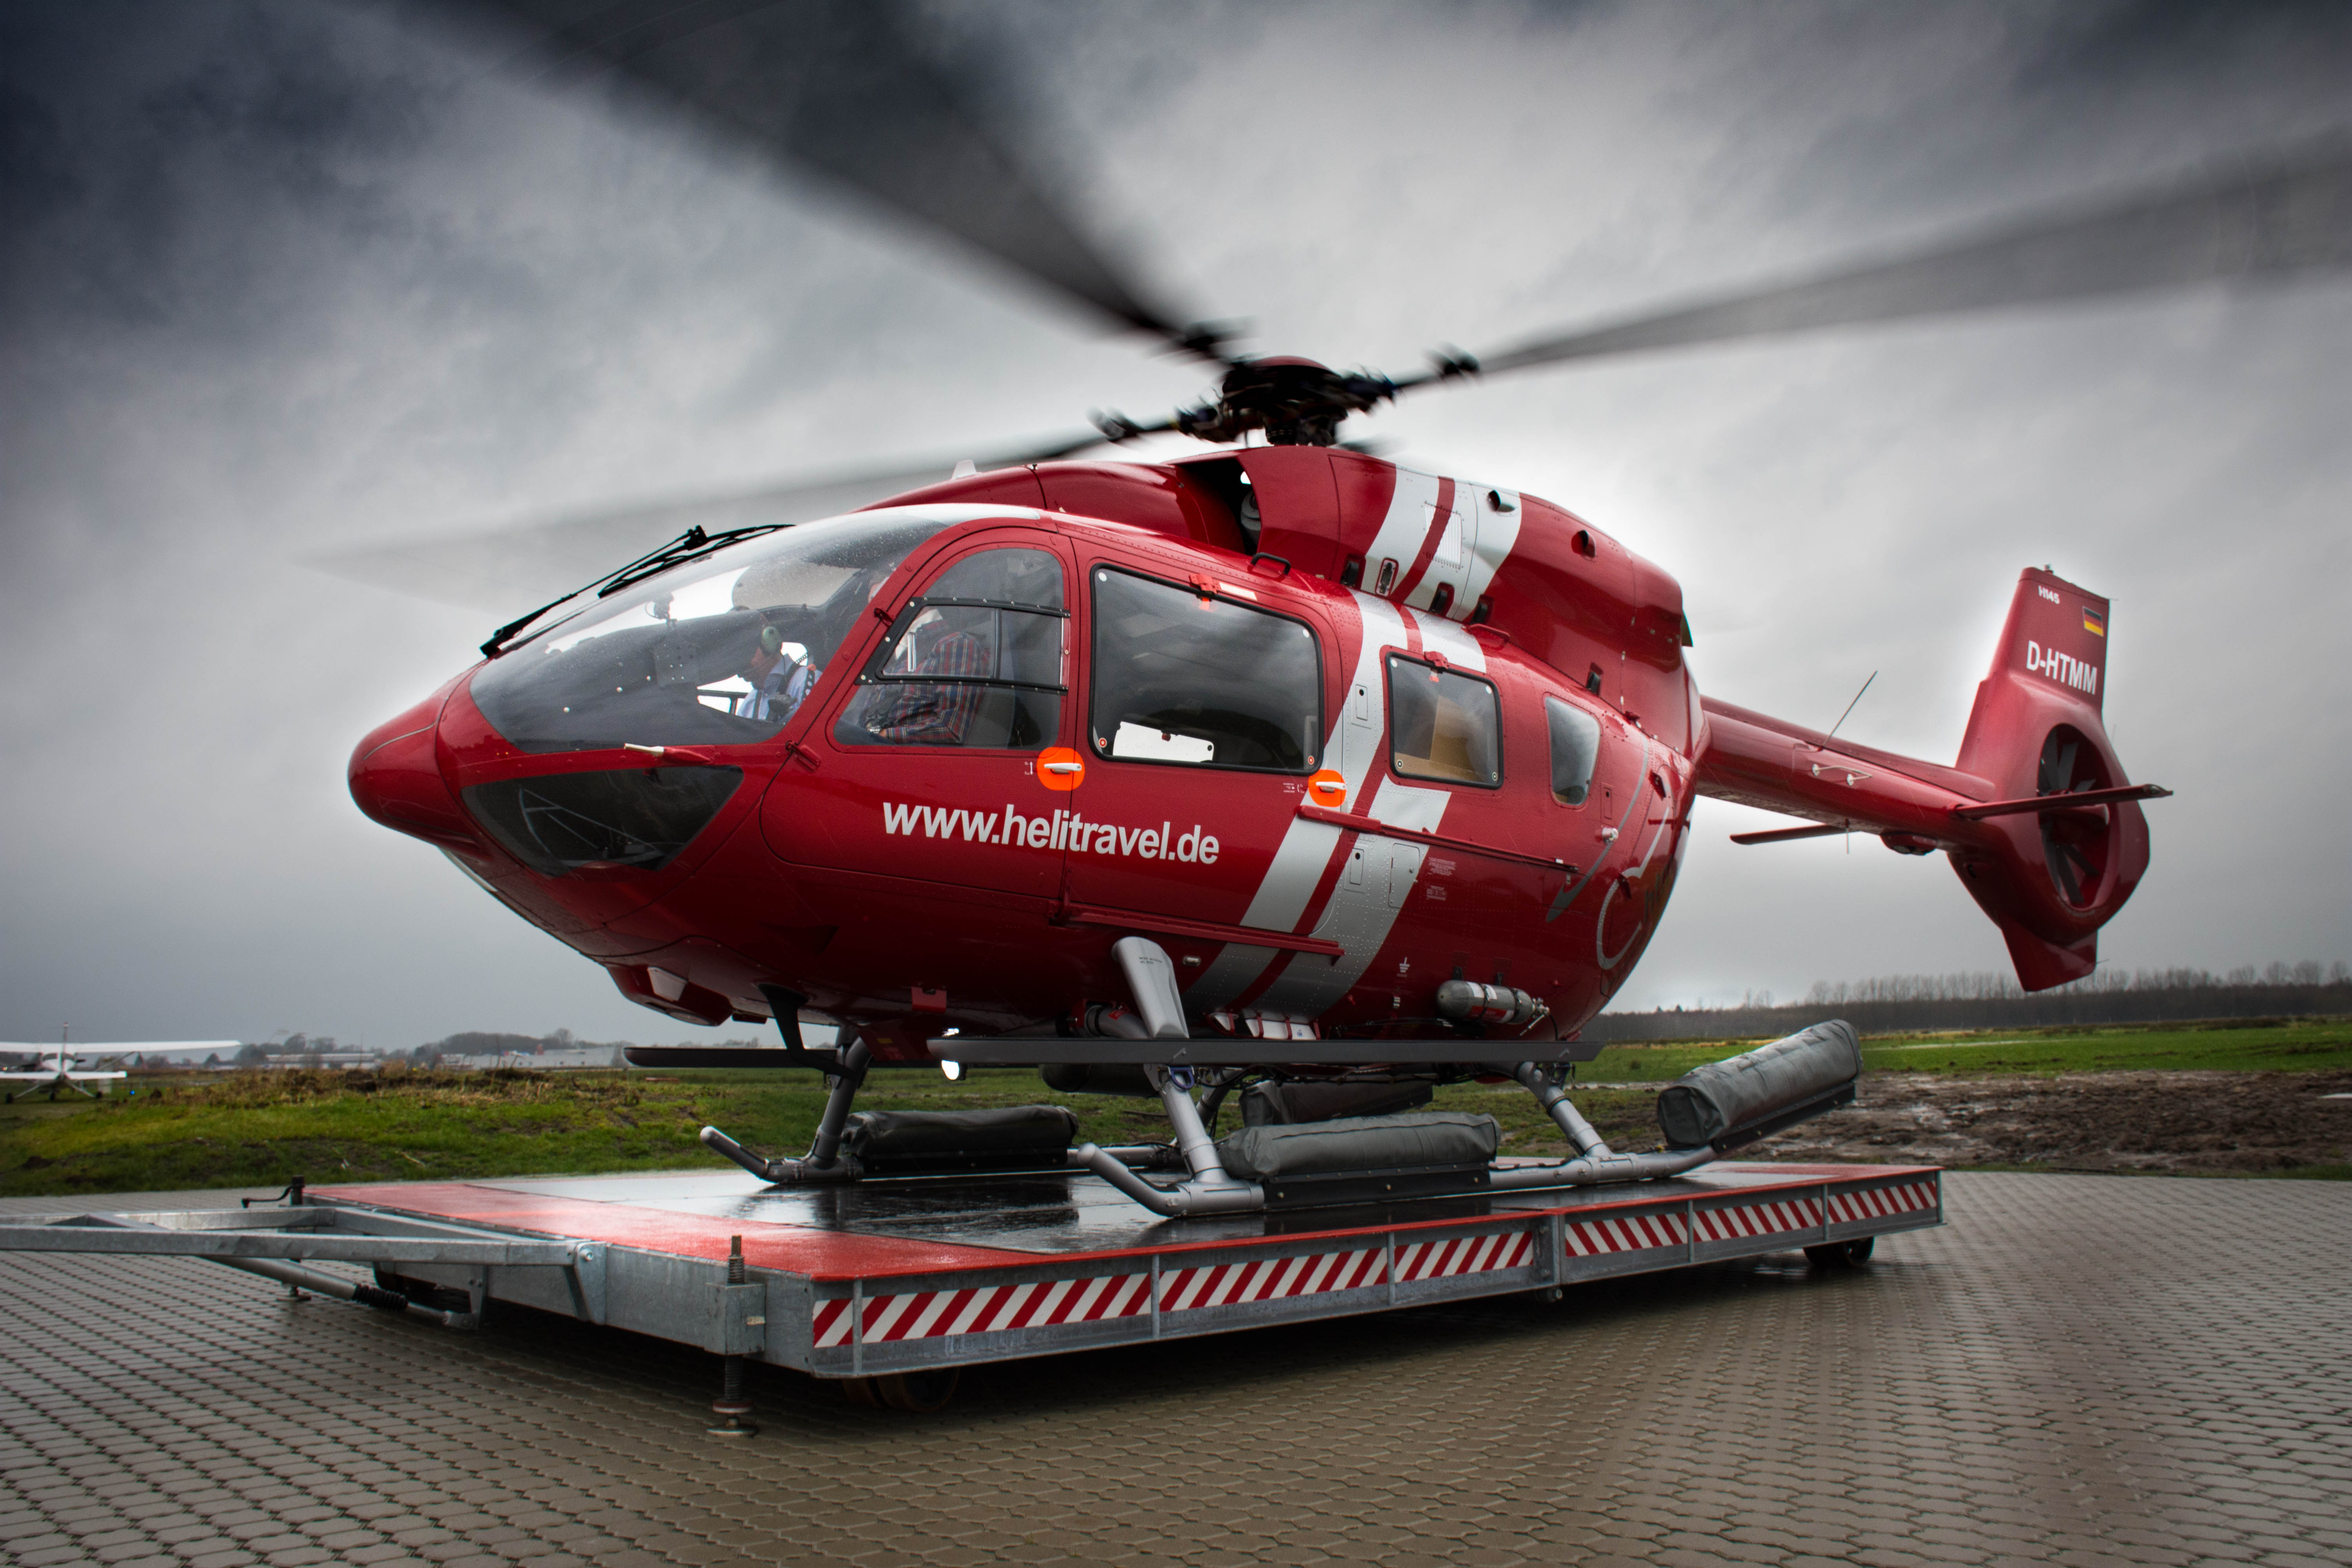 HTM will use the H145 for supporting the offshore wind business in the German Bay.